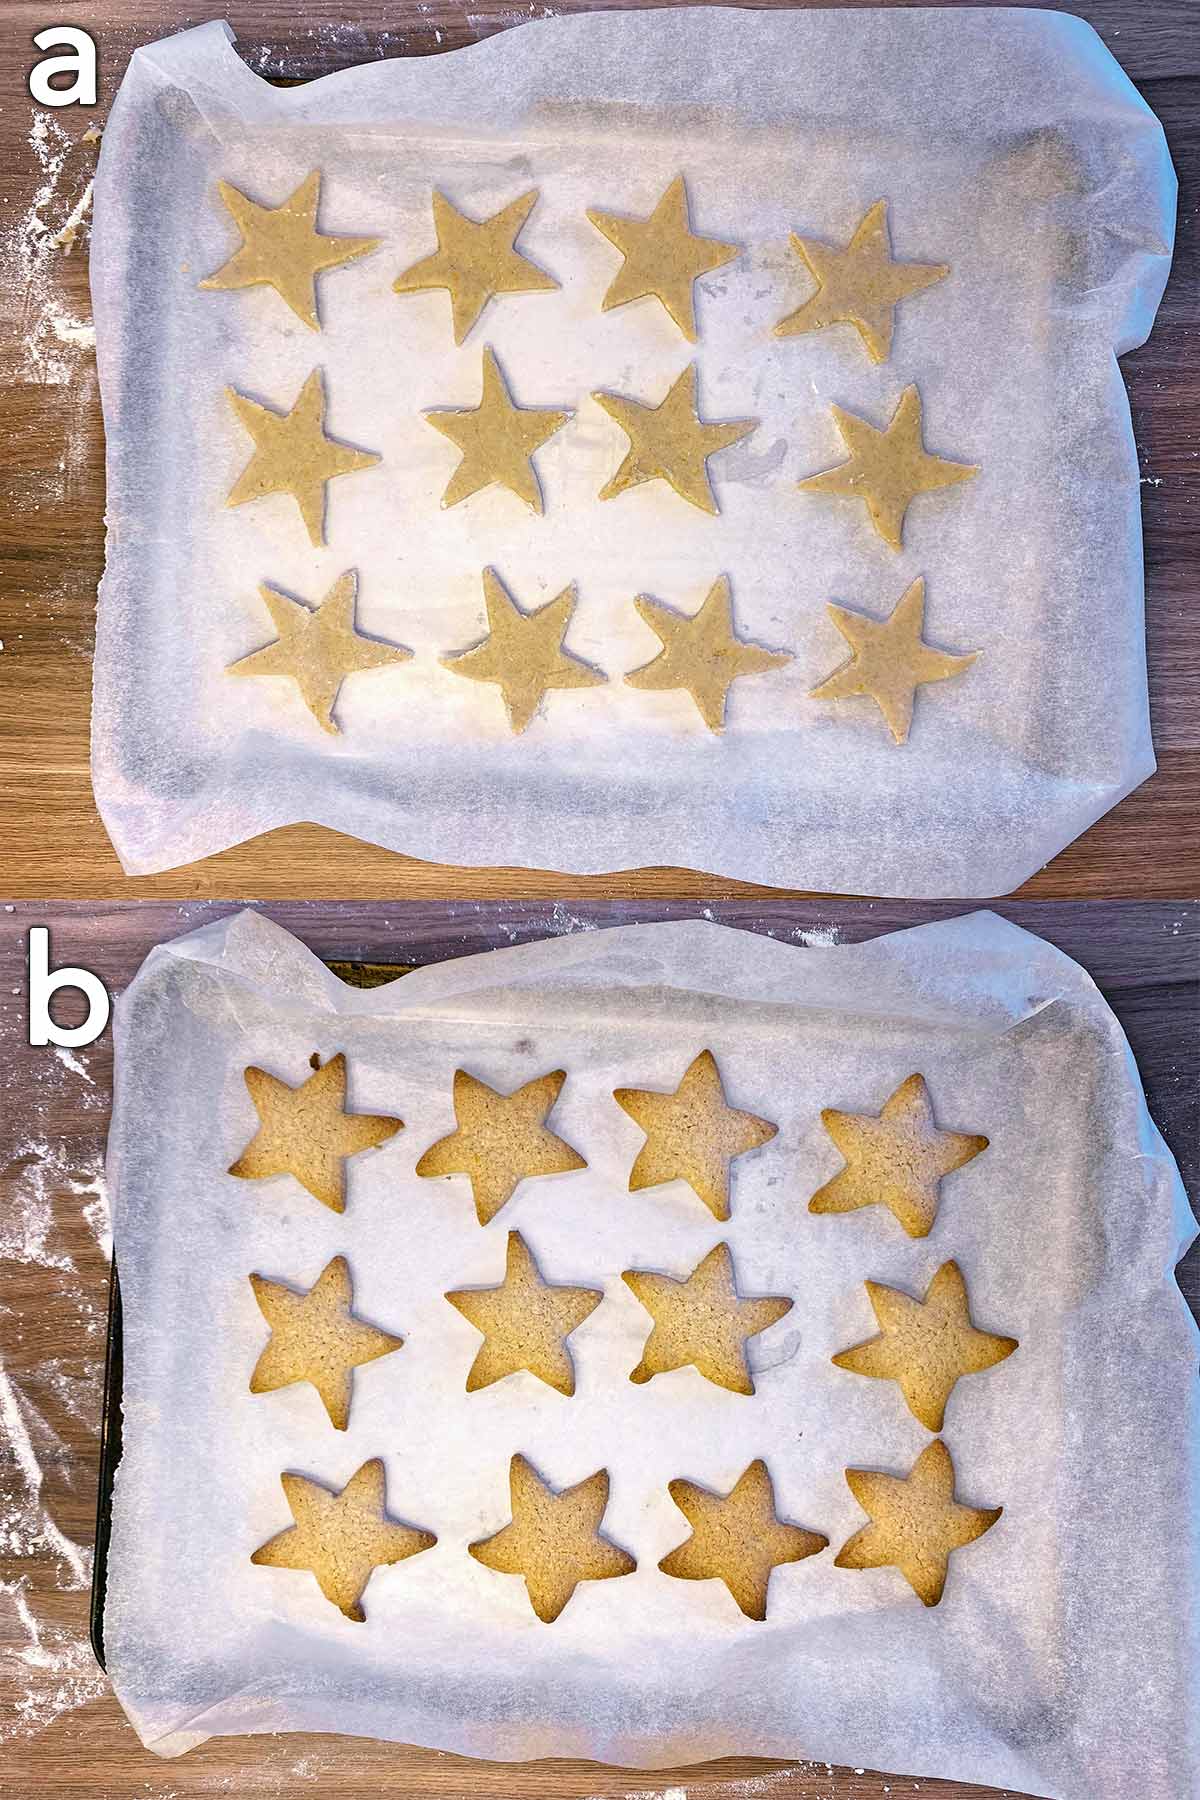 Star shaped biscuits on a baking tray, before and after cooking.